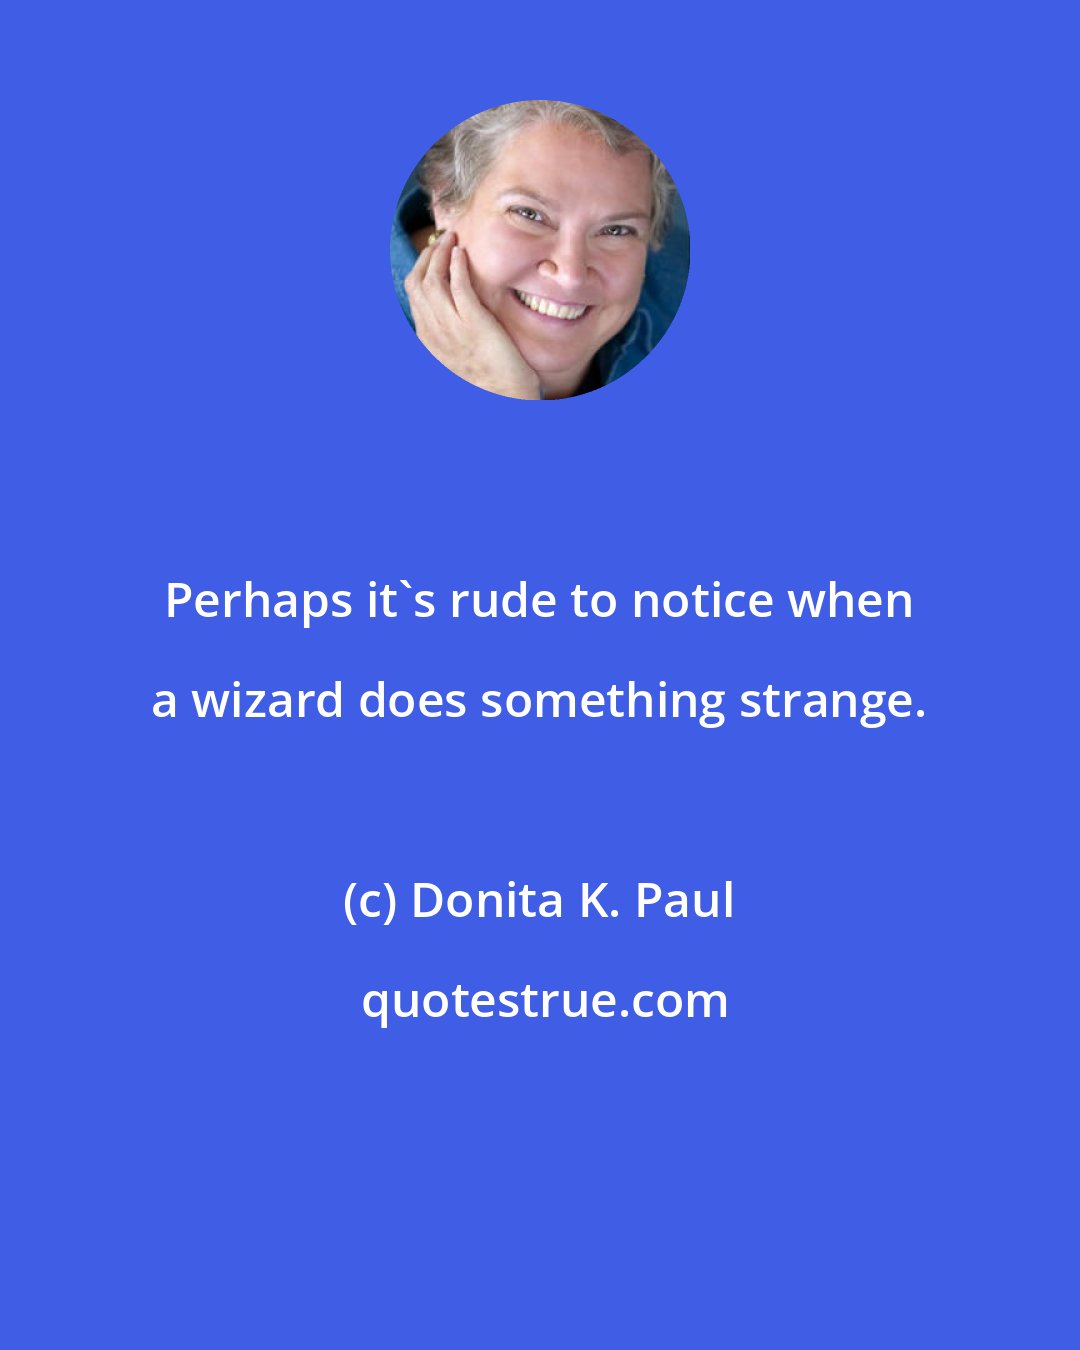 Donita K. Paul: Perhaps it's rude to notice when a wizard does something strange.